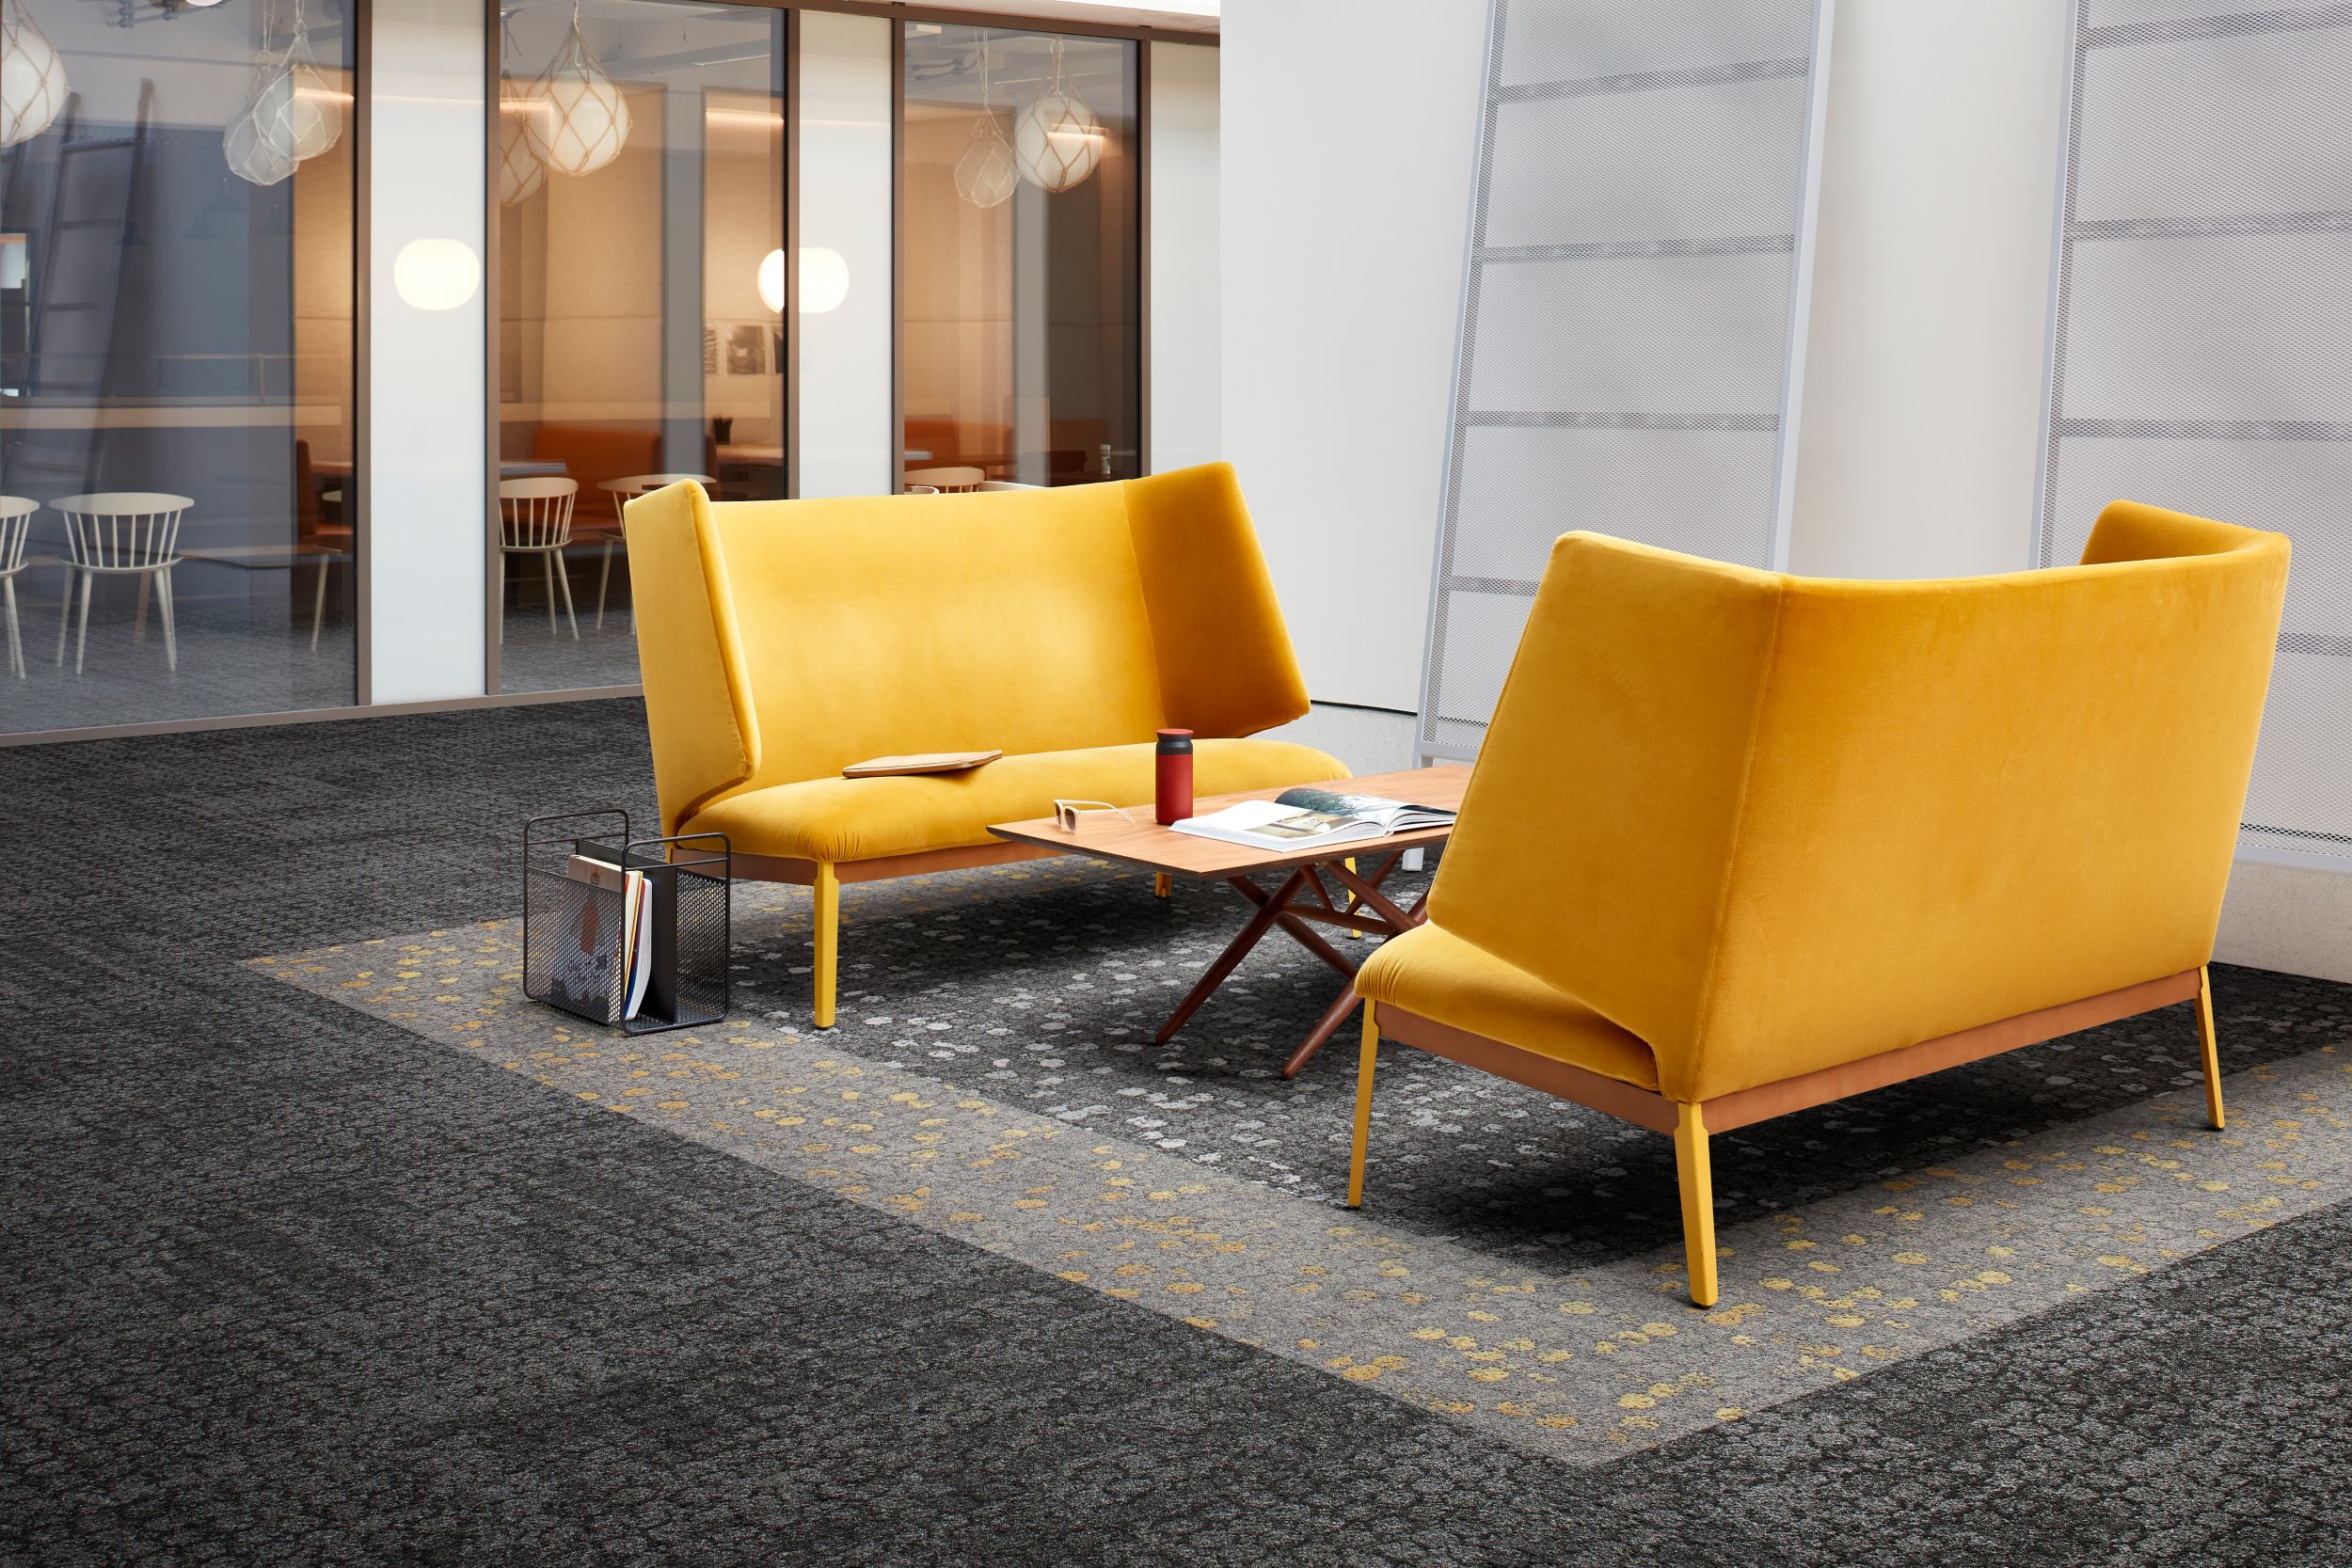 Interface Mercer Street and Broome Street carpet tile in seating area with two yellow couches número de imagen 6